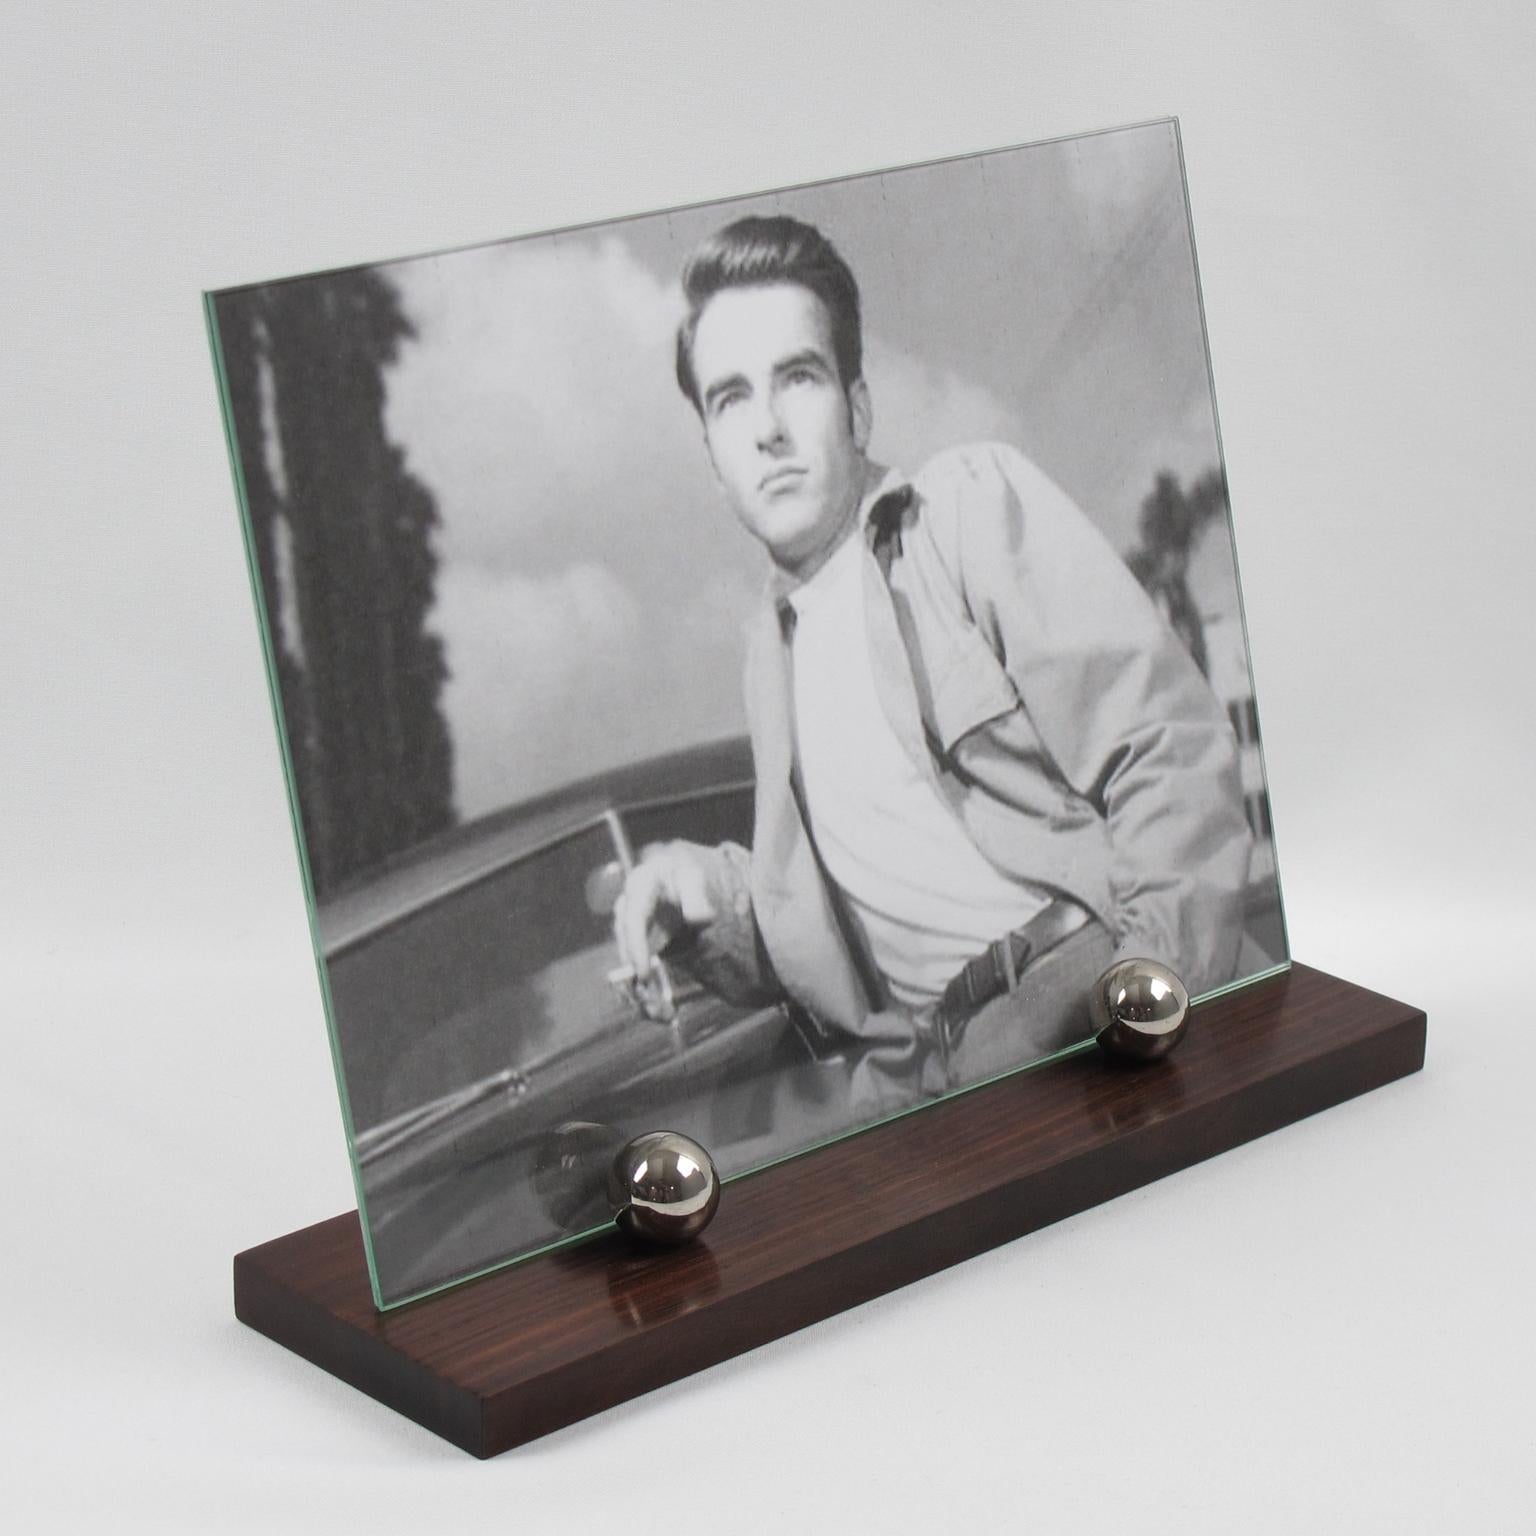 Elegant French Art Deco picture photo frame. Featuring thick hand-rubbed Macassar wood plinth complimented with two polished chrome metal balls. The frame is complete with its two glass sheets to enclose the photograph. The picture can be placed in